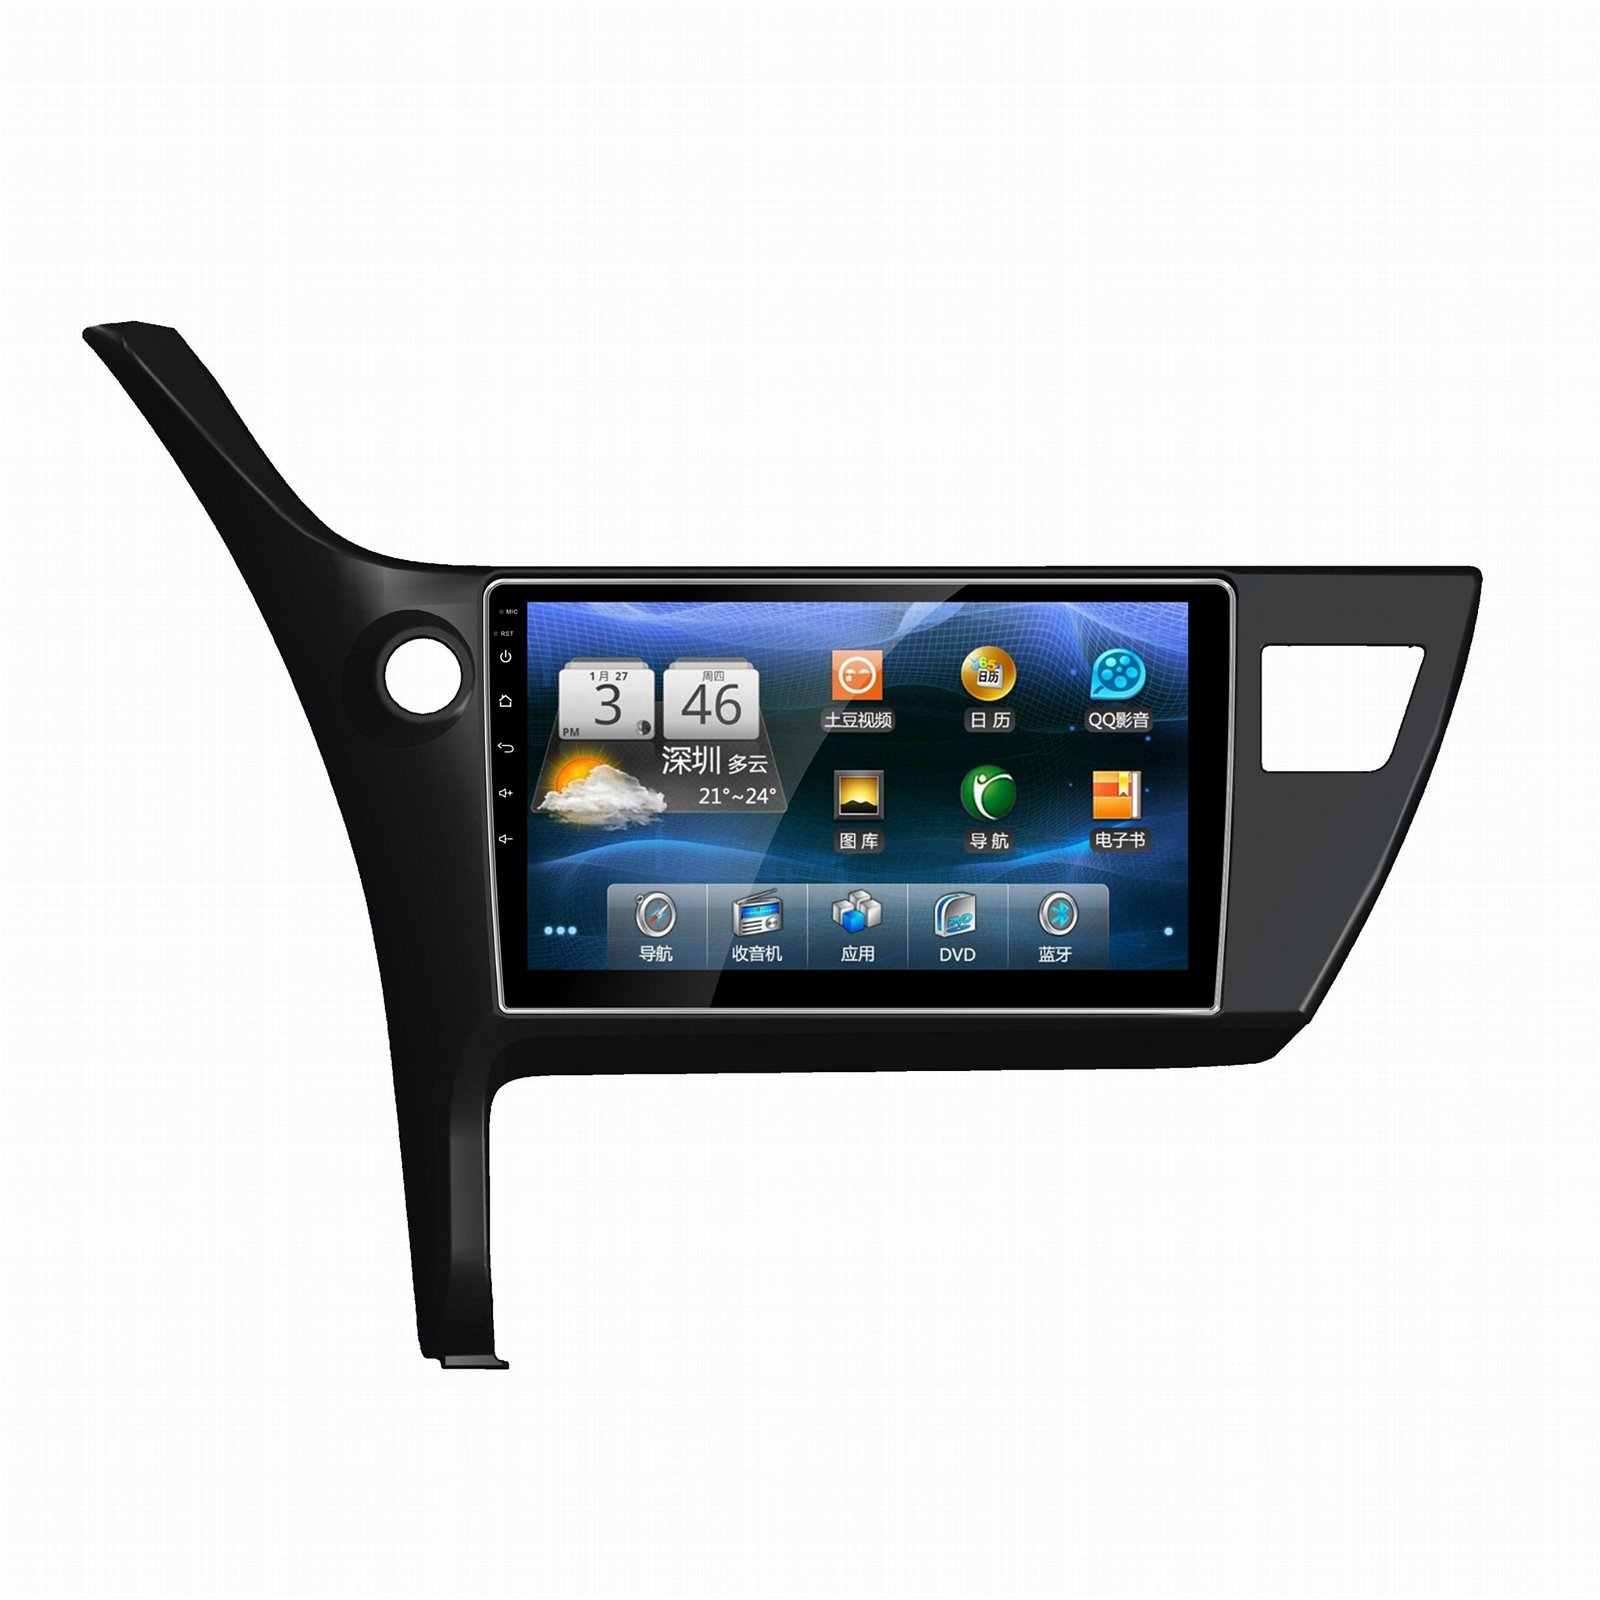 10.1 inch android 6.0 car dvd for toyota corolla car radio gps navigation 